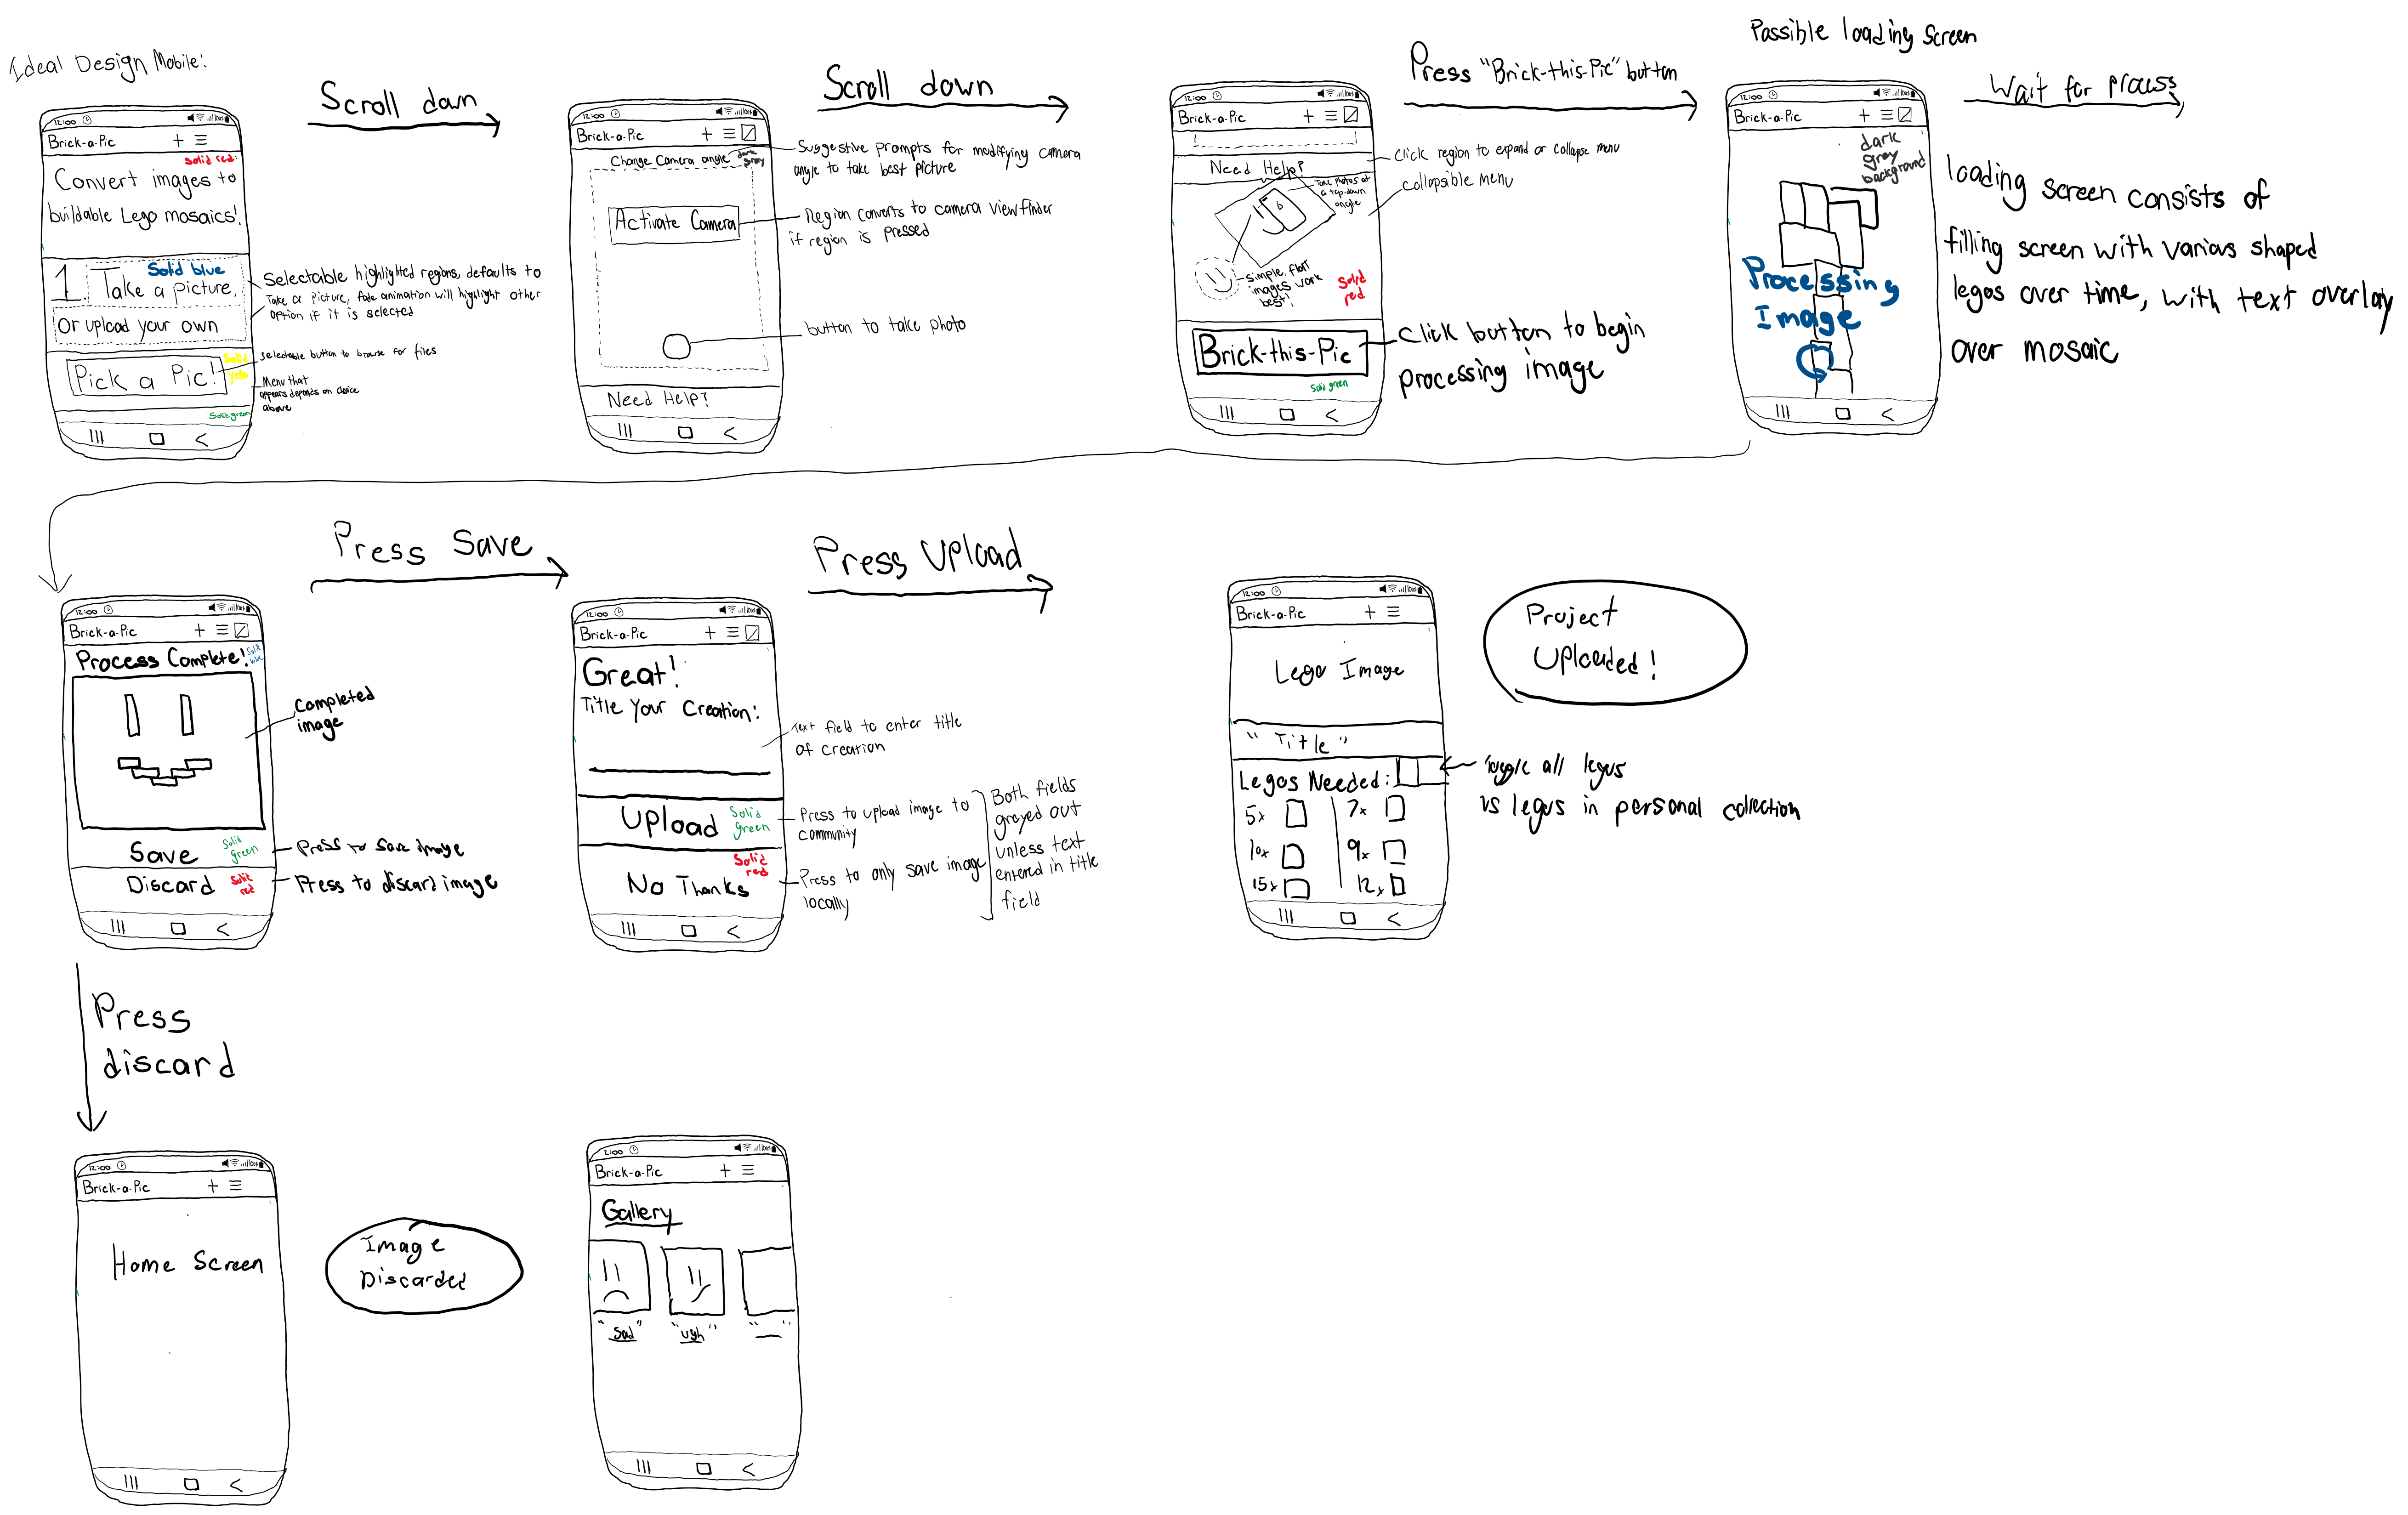 Roughly sketched flow chart detailing user flow of Brick-a-Pic app